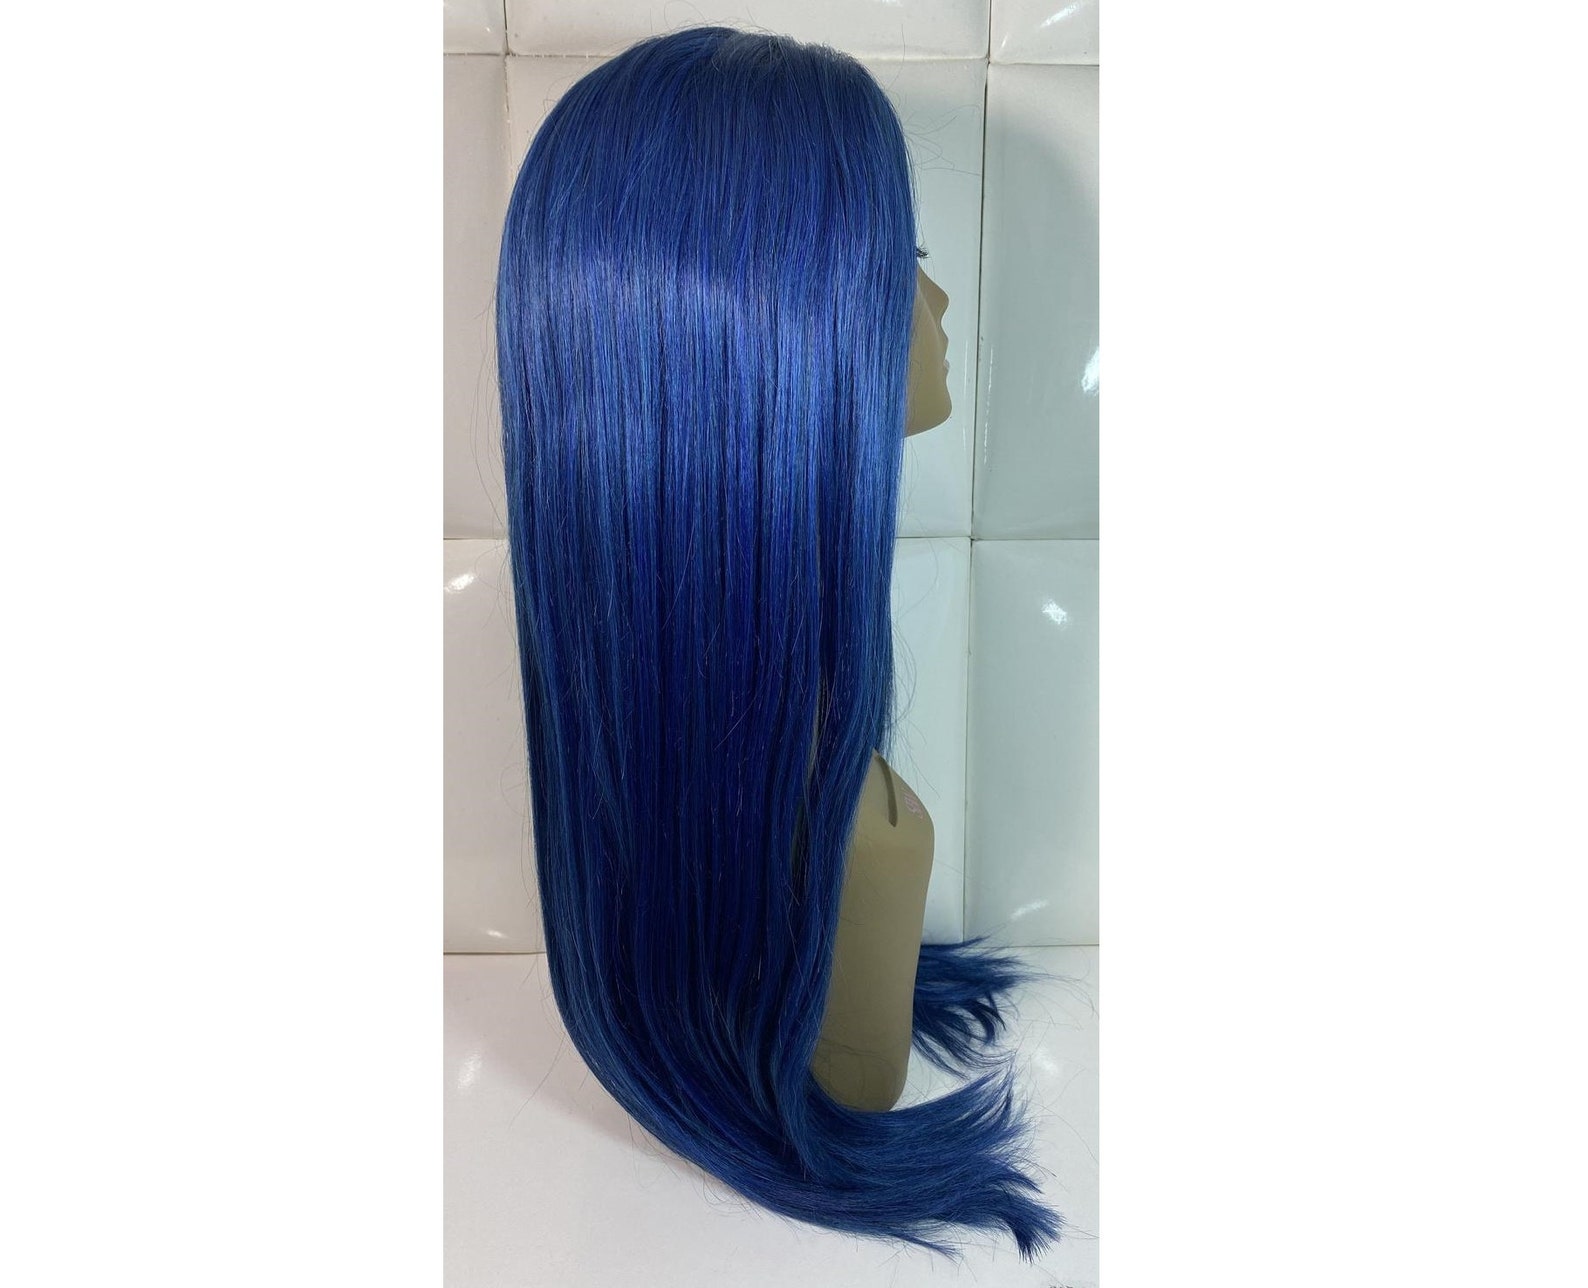 10. "Lace Front Blue Hair Wigs" - wide 4